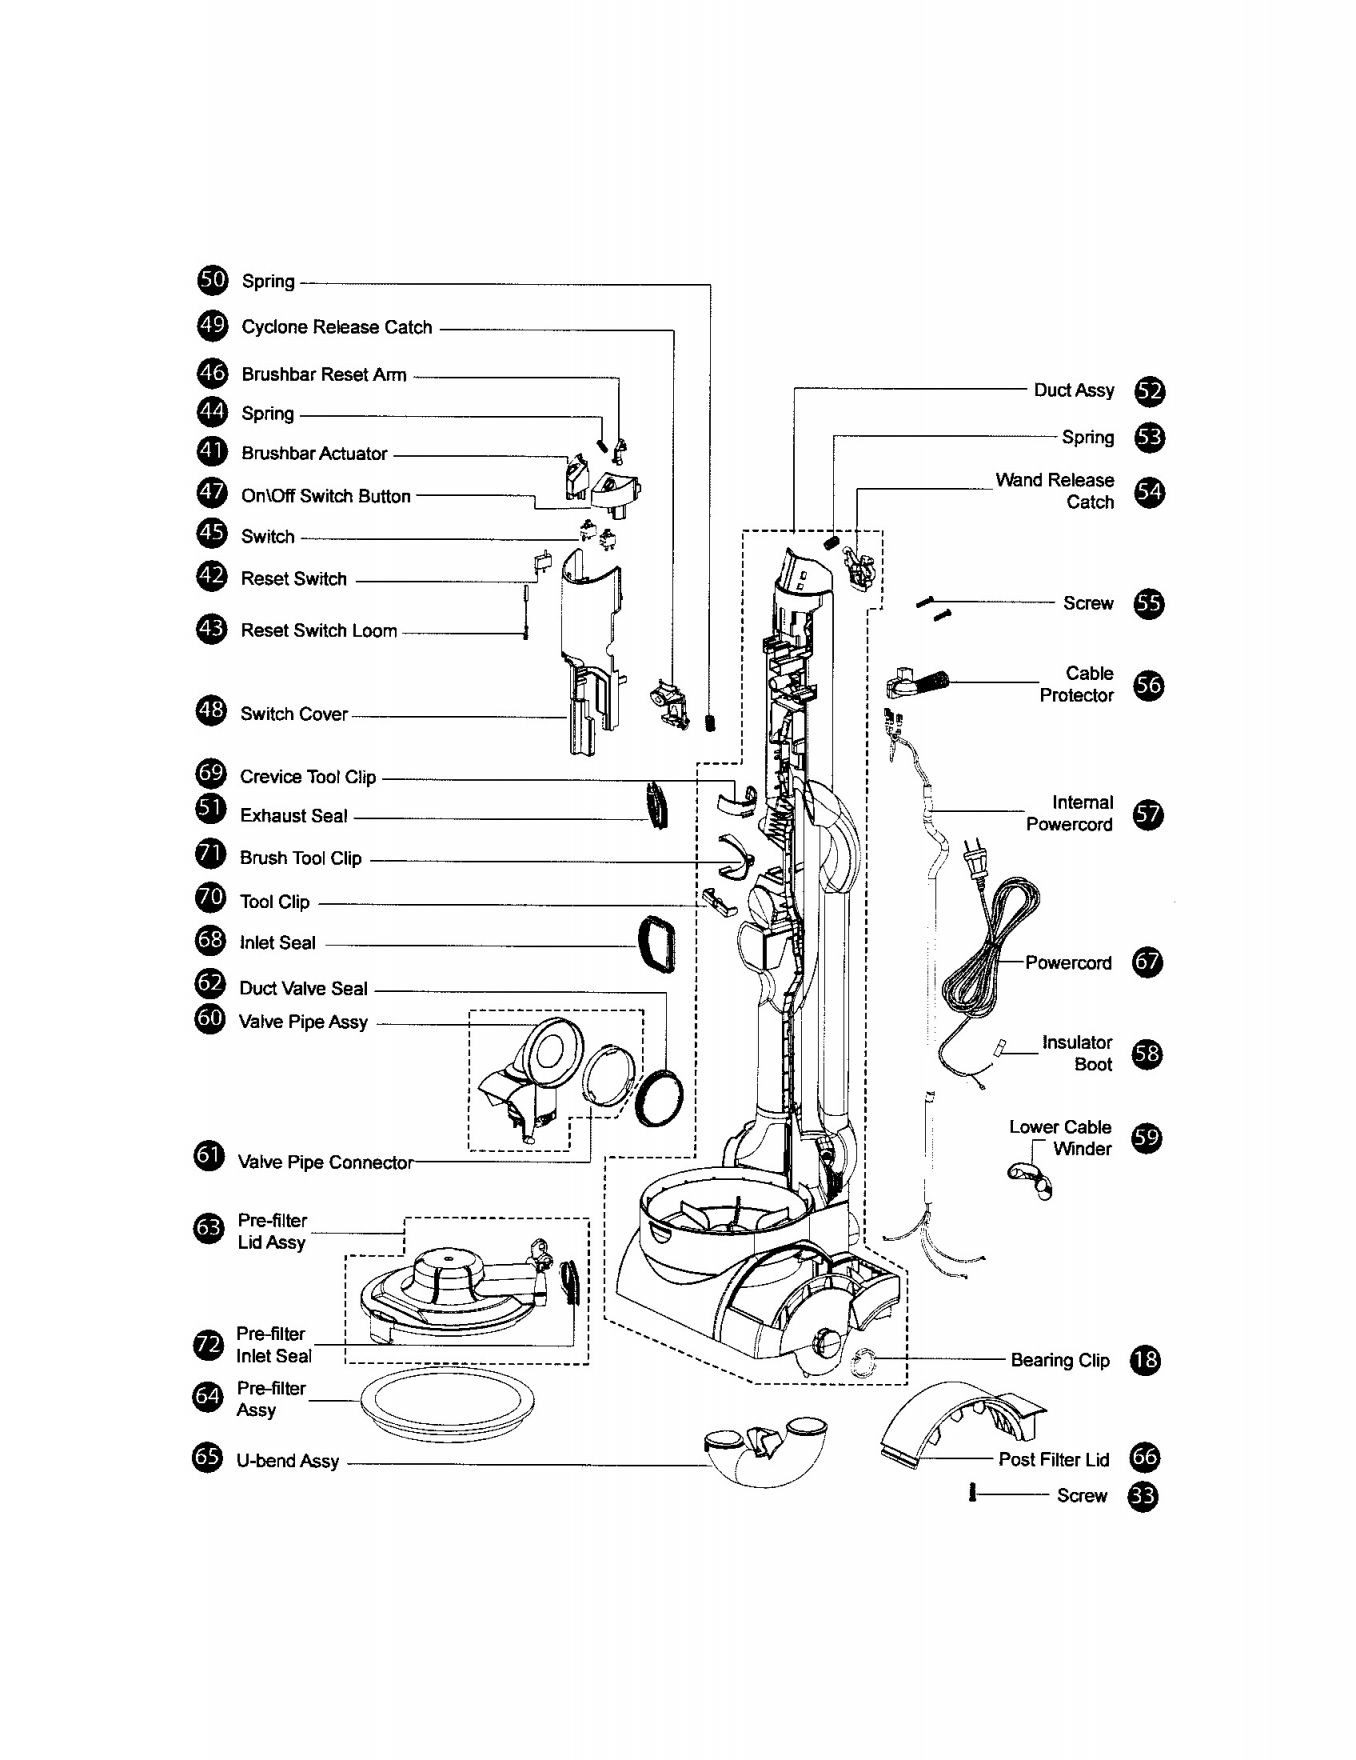 Dyson Dc17 Parts Diagram Brand New Dyson Dc17 Animal Parts Diagram Up18 – Documentaries for